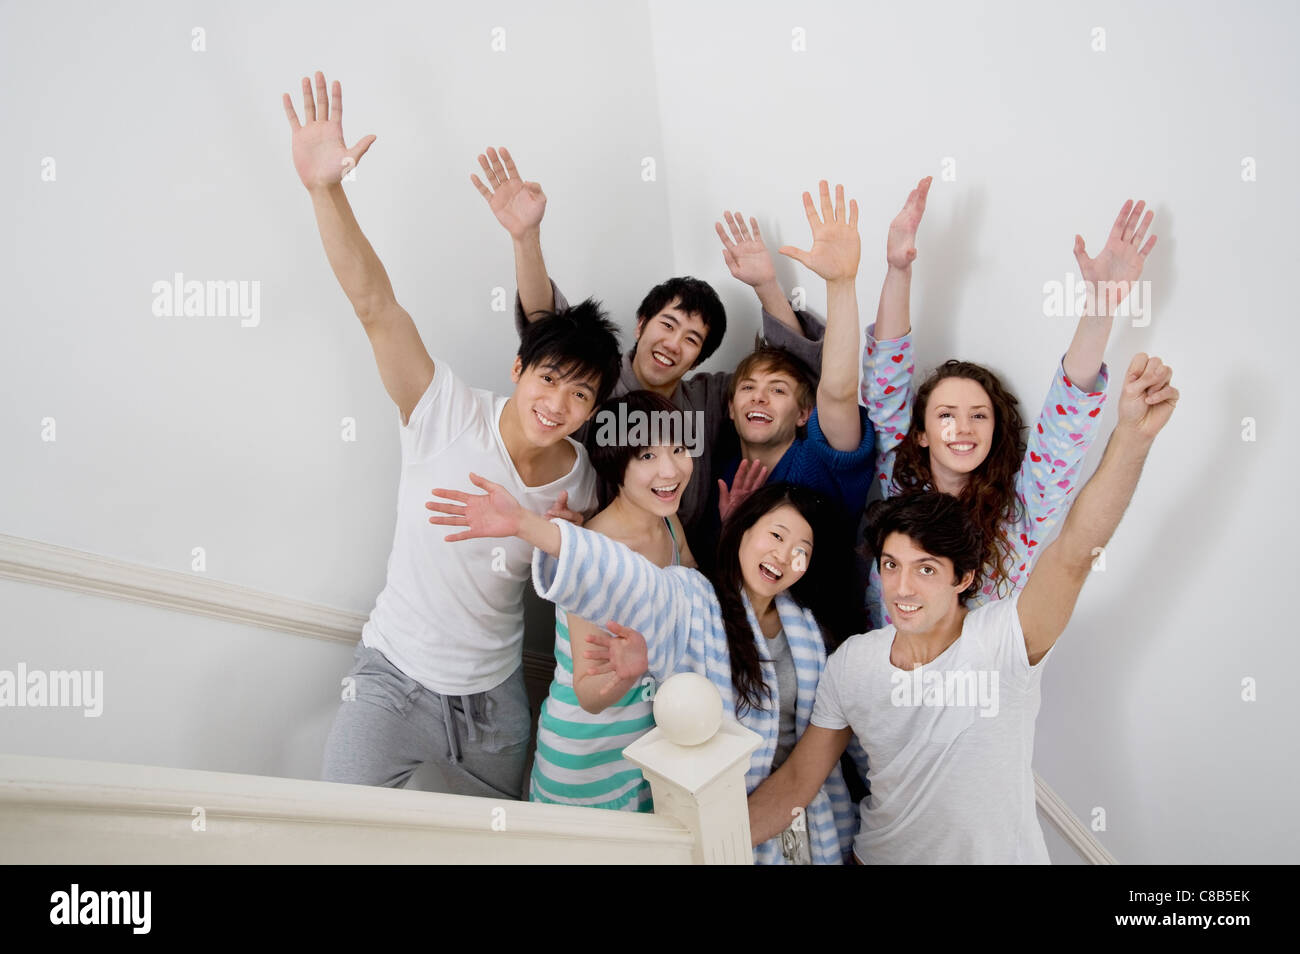 Group of young friends raising arms Stock Photo